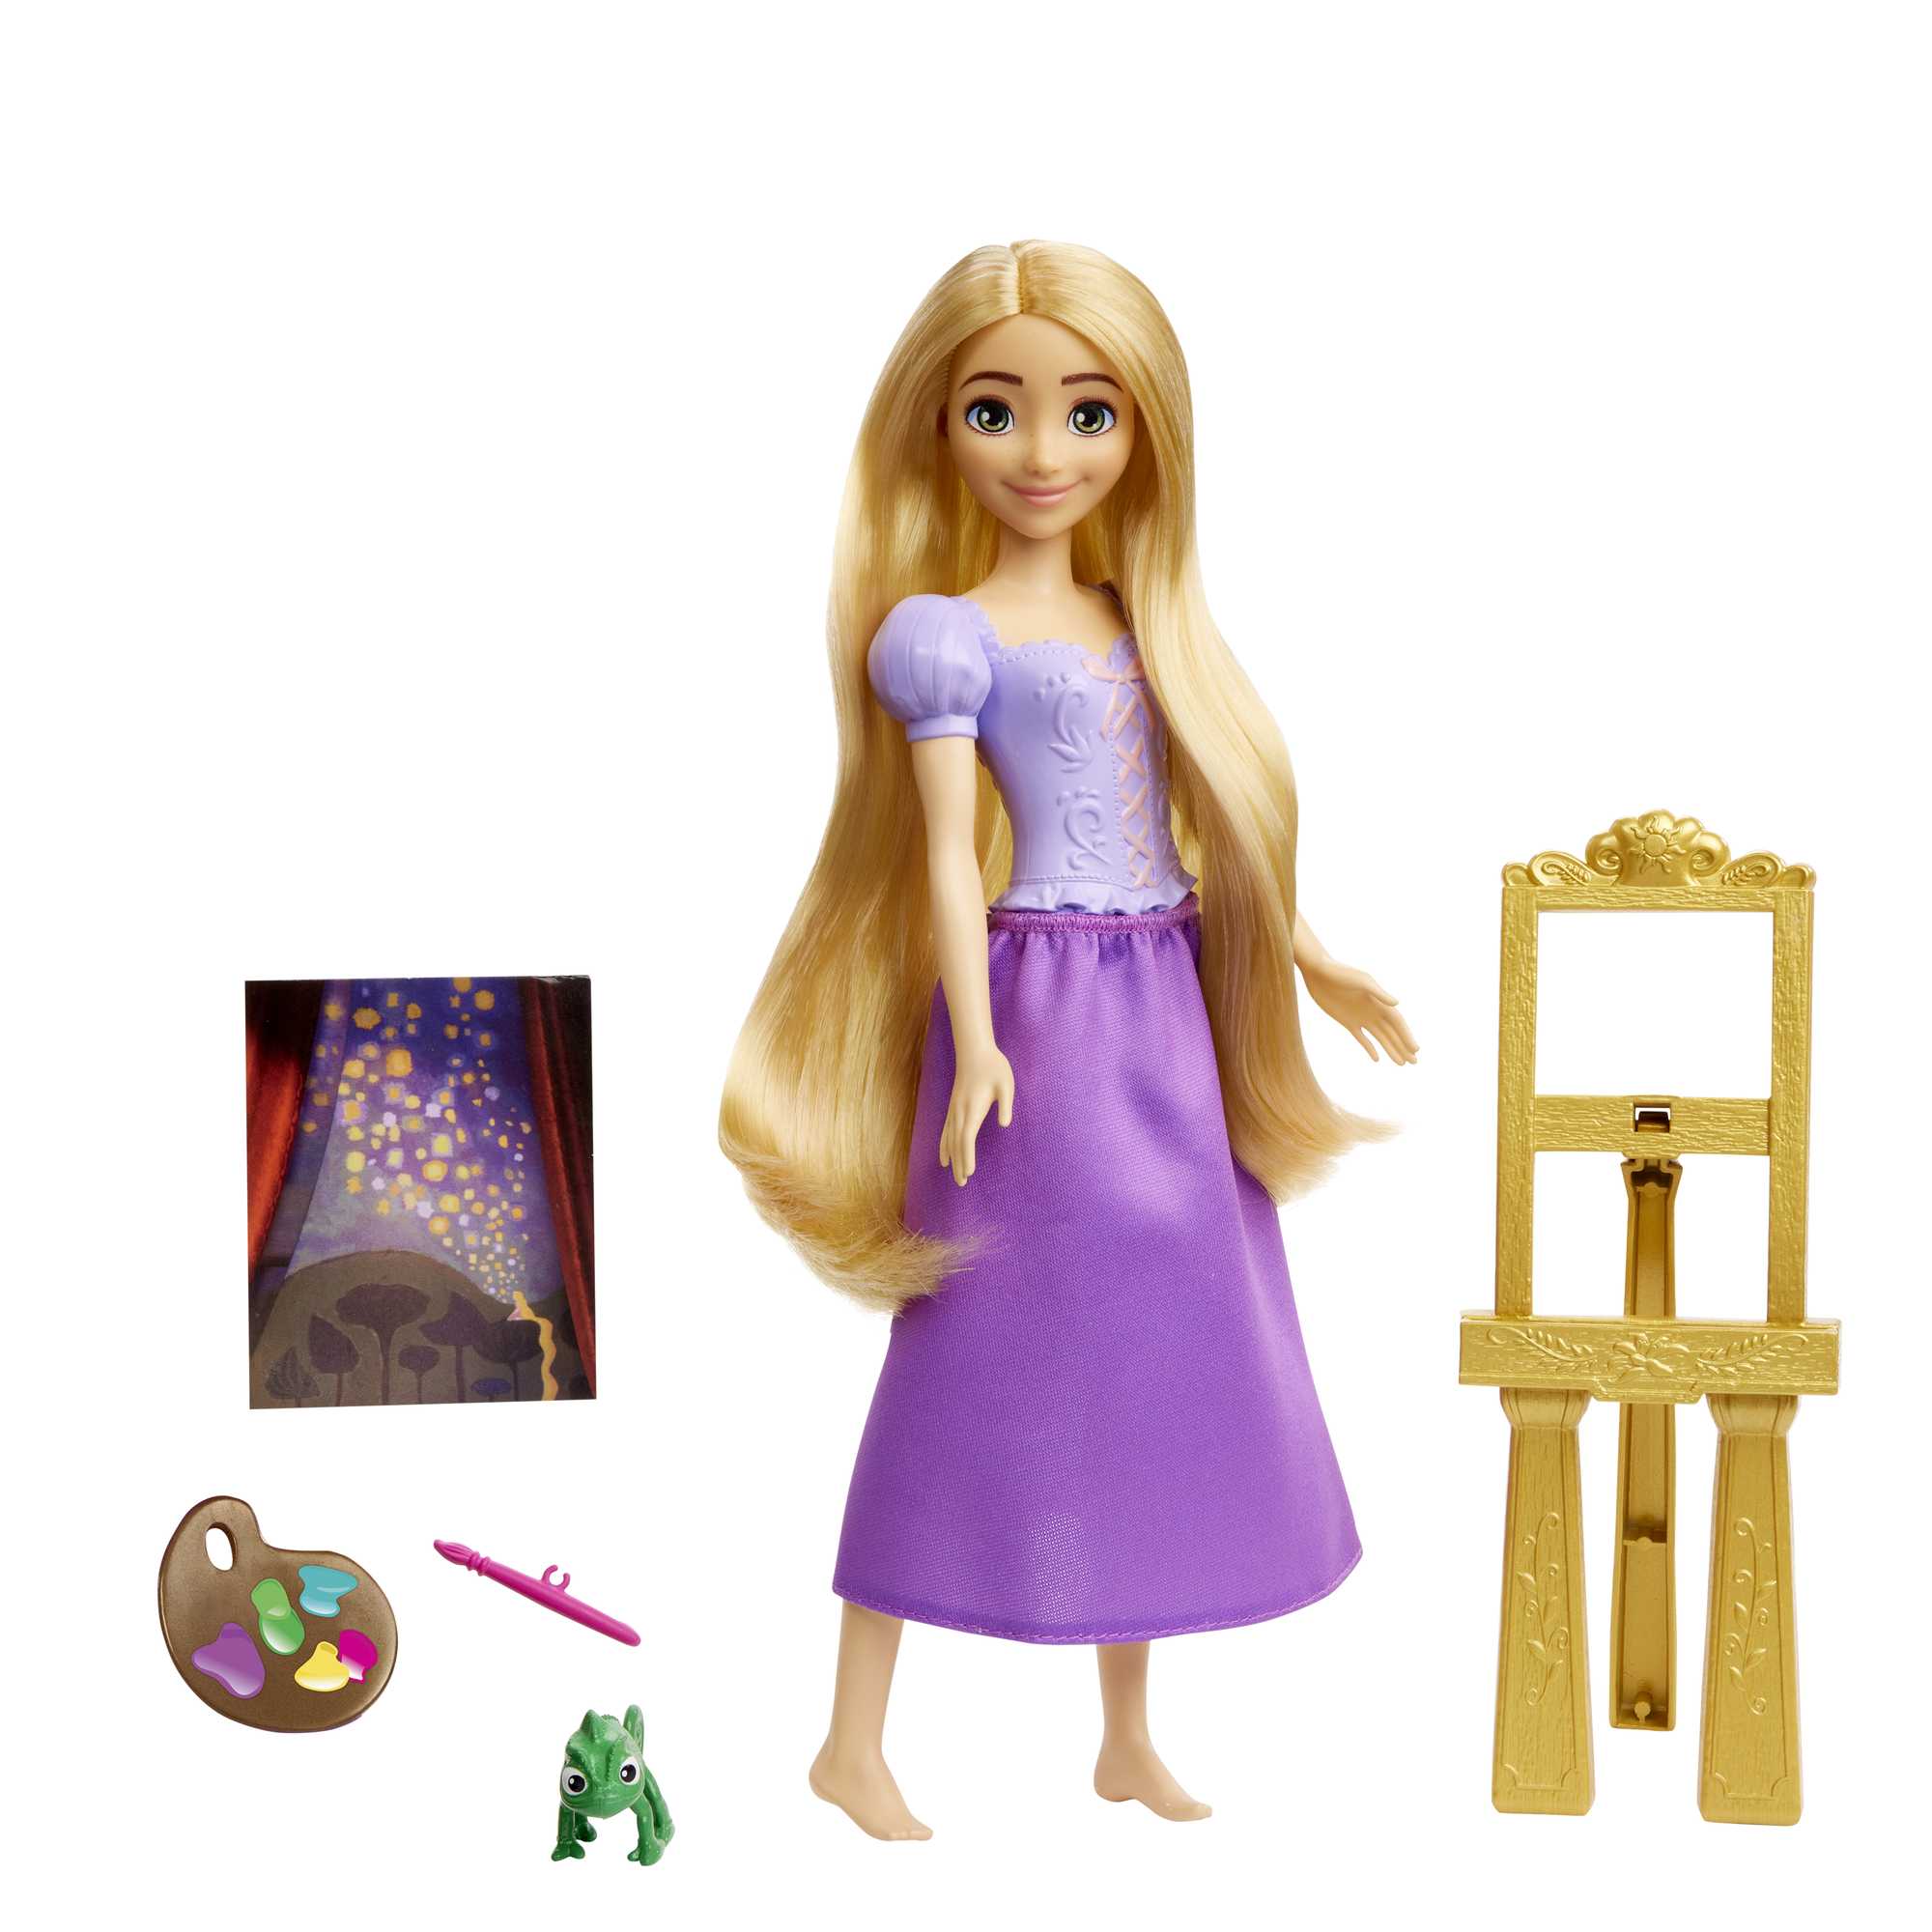 Disney Princess Rapunzel Fashion Doll, Character Friend and 3 Accessories - image 5 of 6